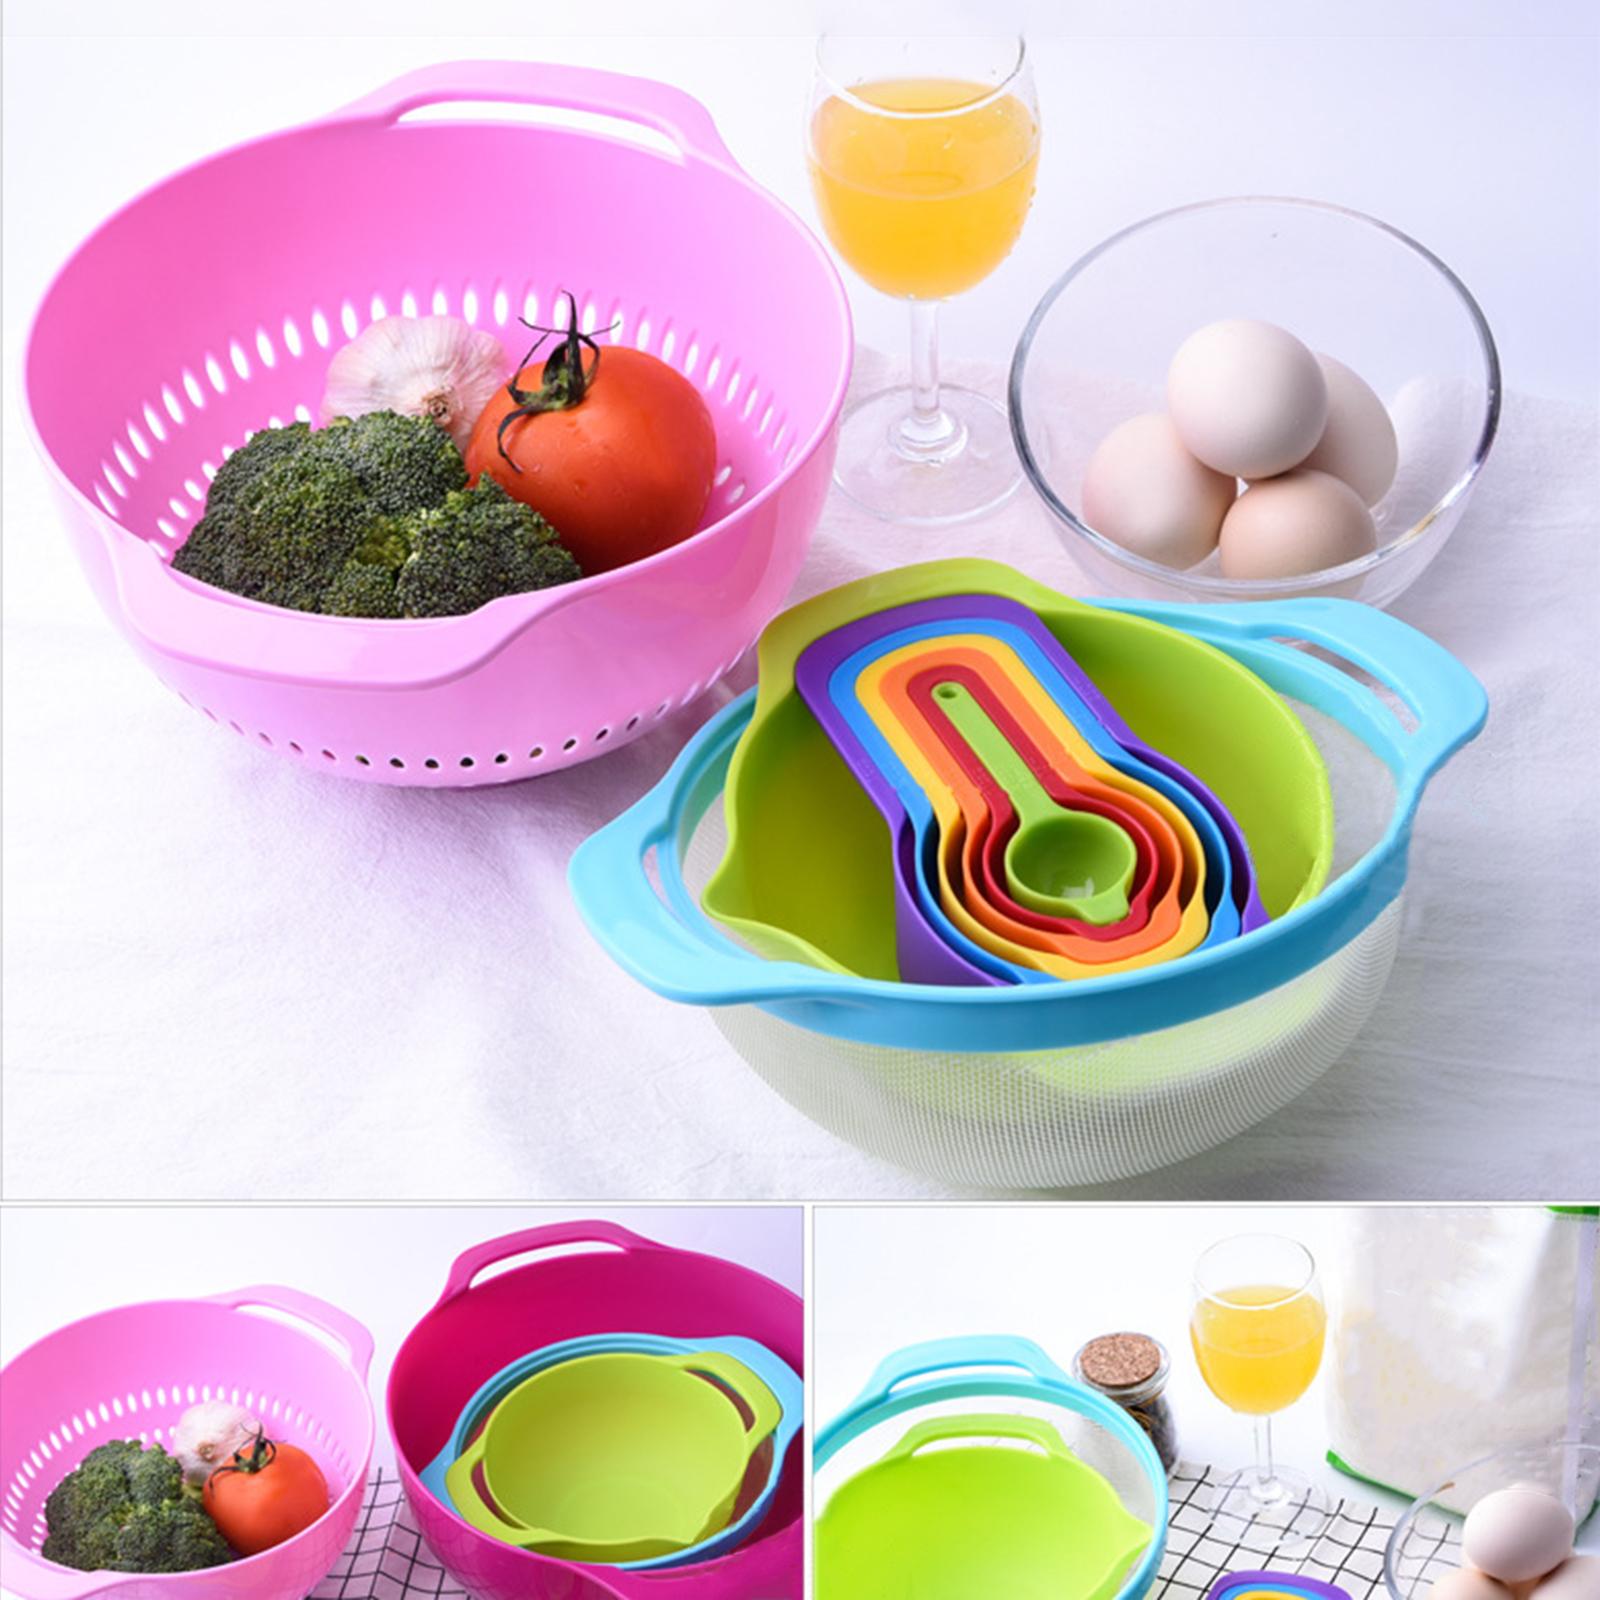 10PCS Mixing Bowl Set Measuring Spoon Set Coloful Sieve Colander Strainer Bowl Salad Bowl With Handle for Kitchen Baking